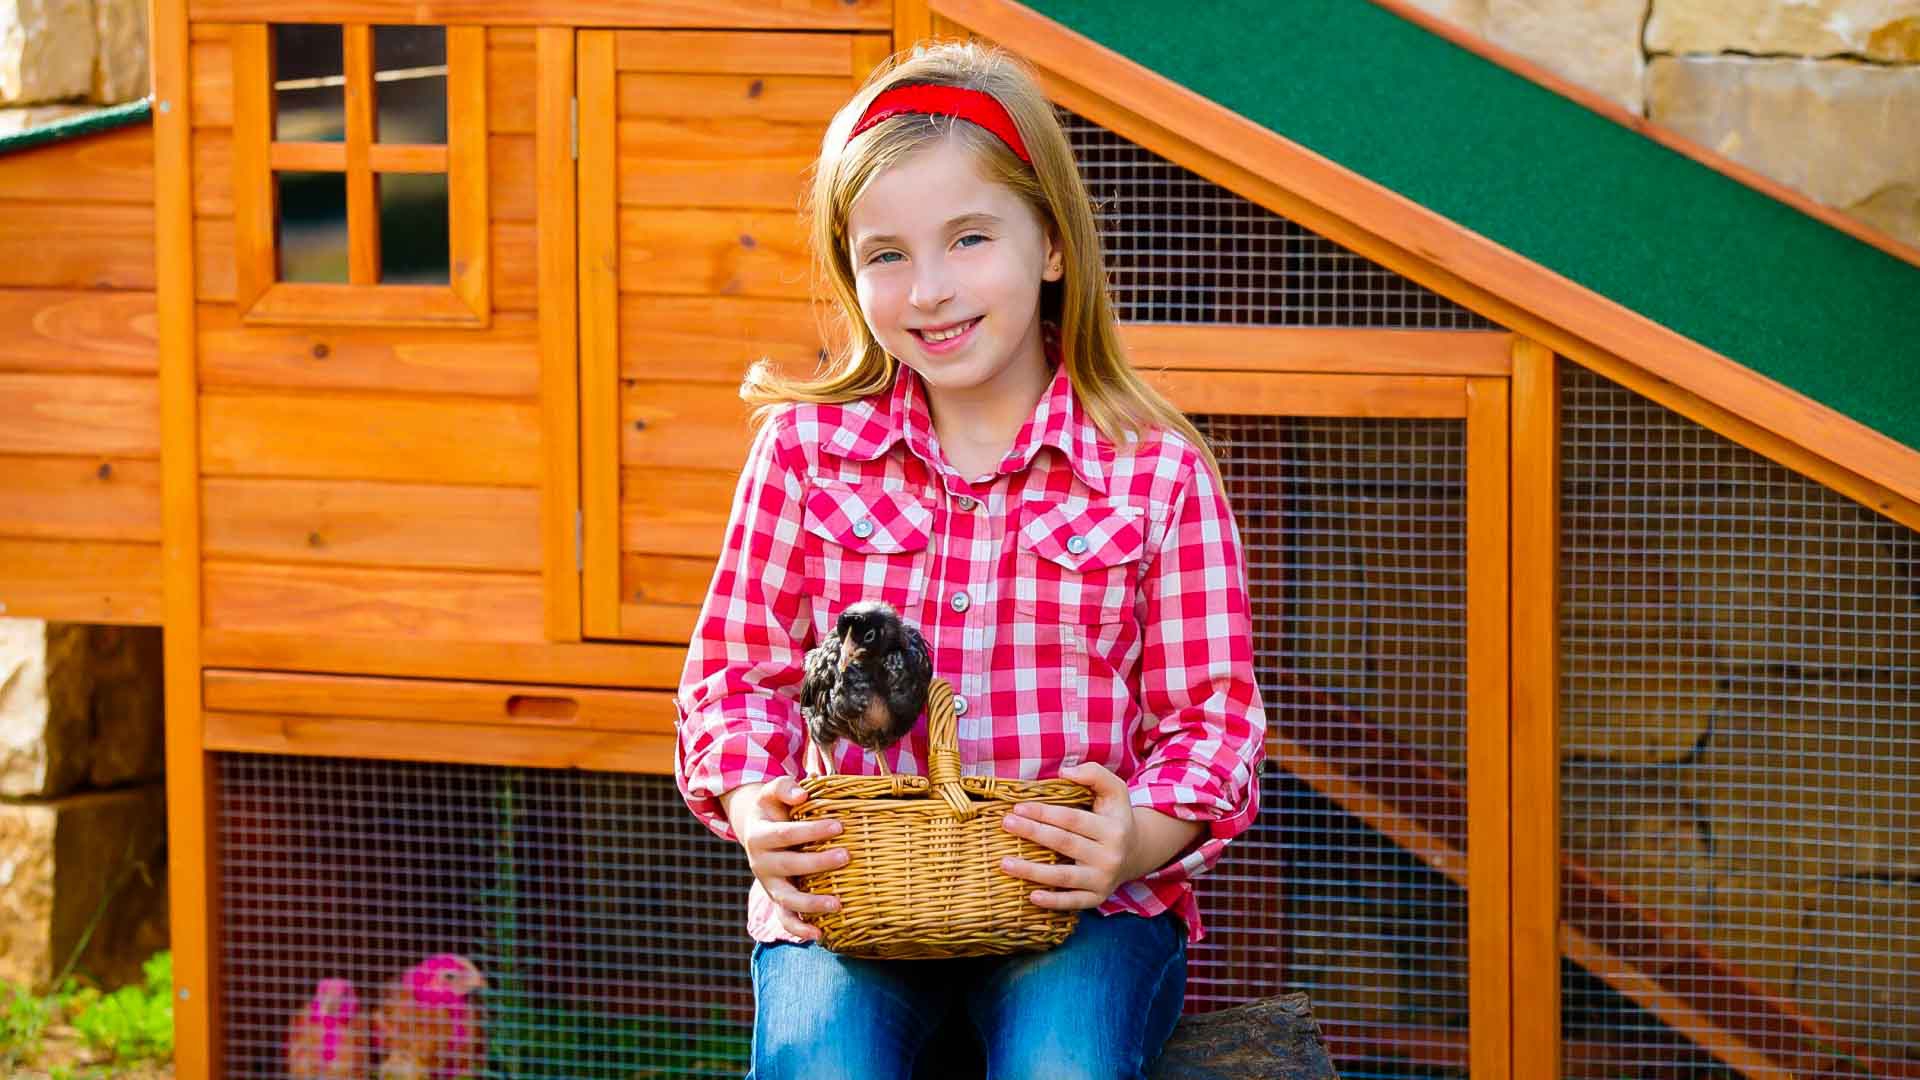 Sun Rise Sheds | Stay Cool, Chickens: Creative Chicken Coop Shade Ideas To Beat the Heat